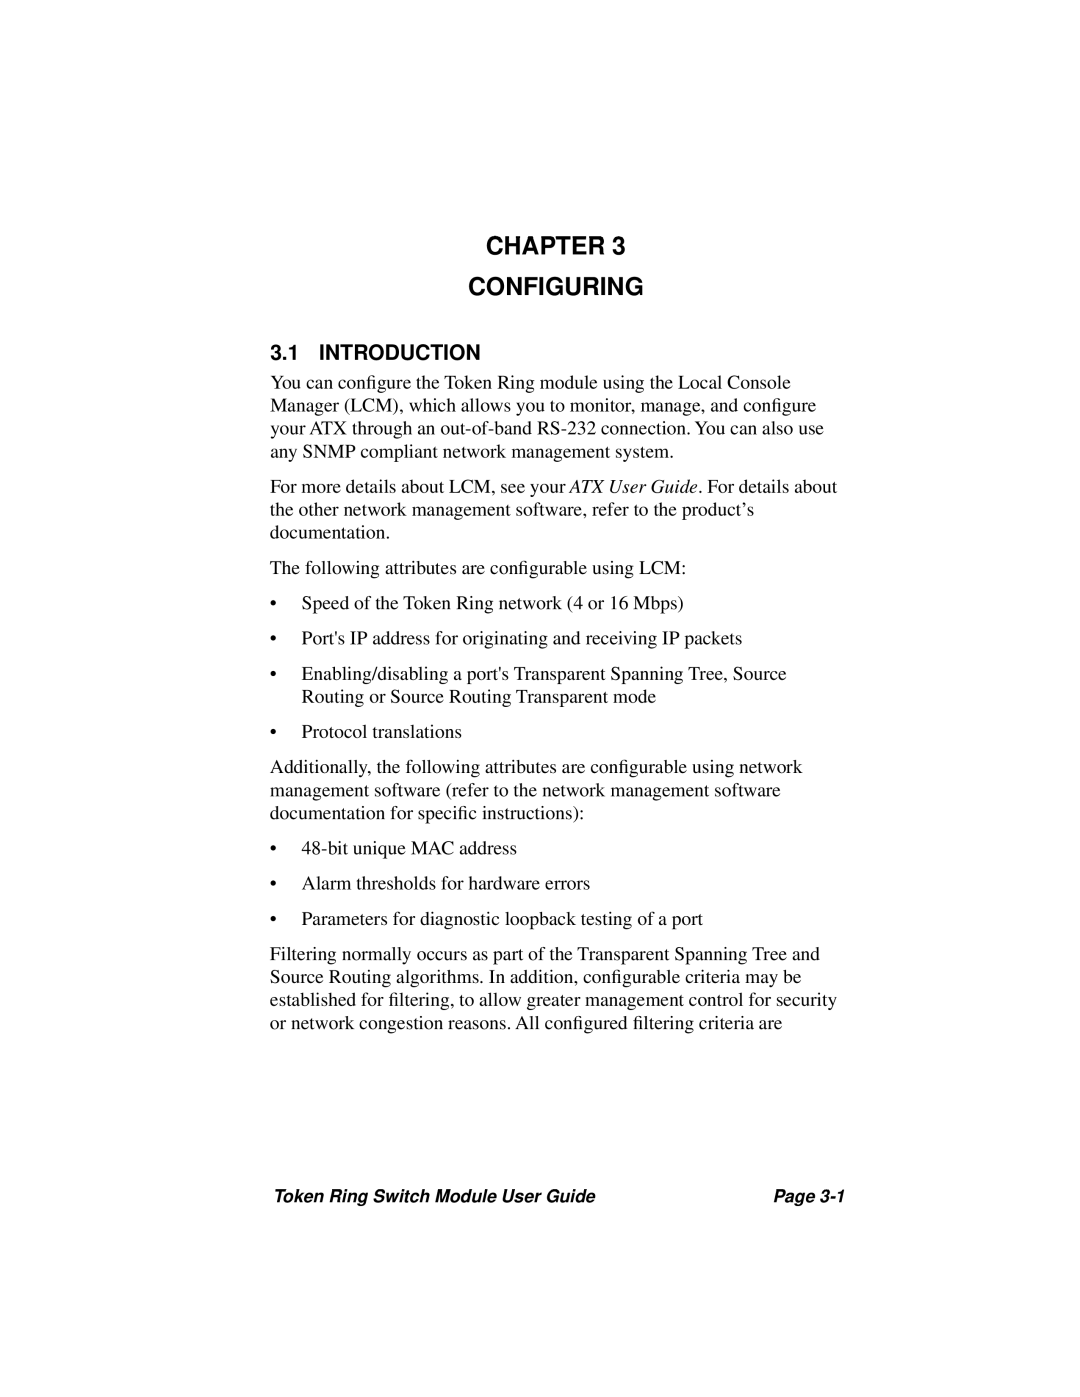 Cabletron Systems 3T02-04 manual Chapter Configuring, Introduction 